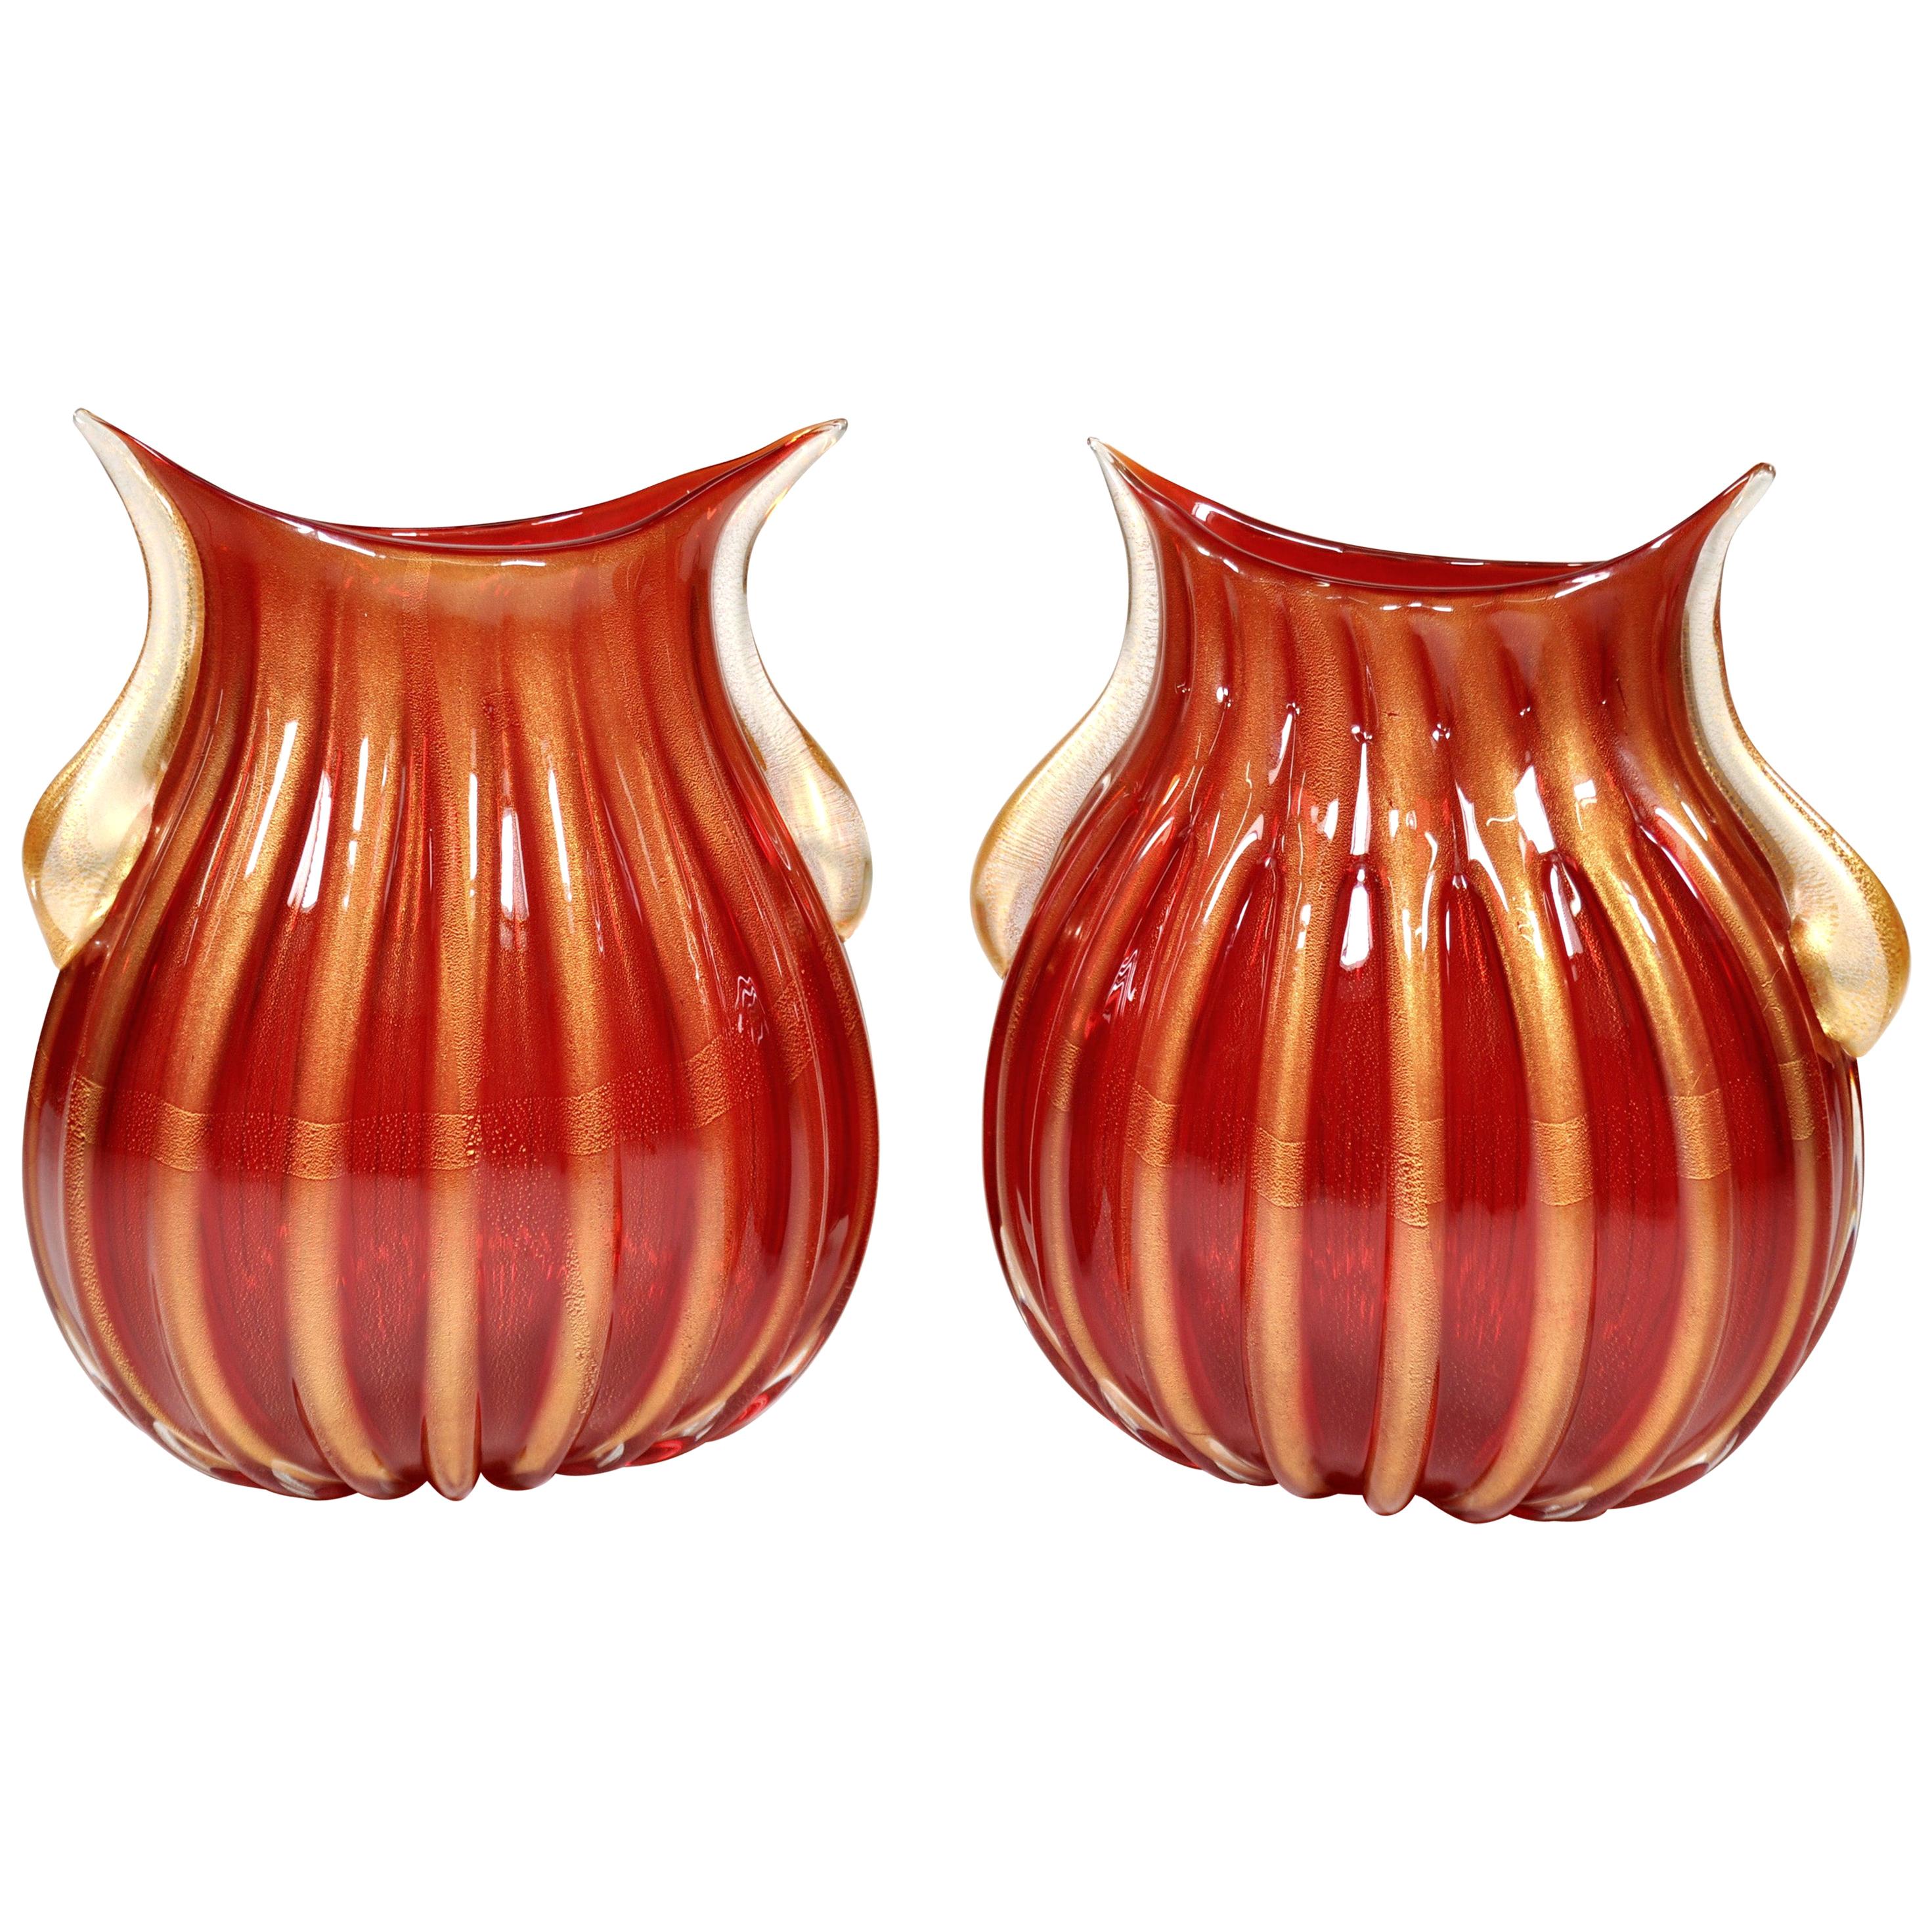 Signed Pair of Red and Gold Murano Glass Vases by Pino Signoretto